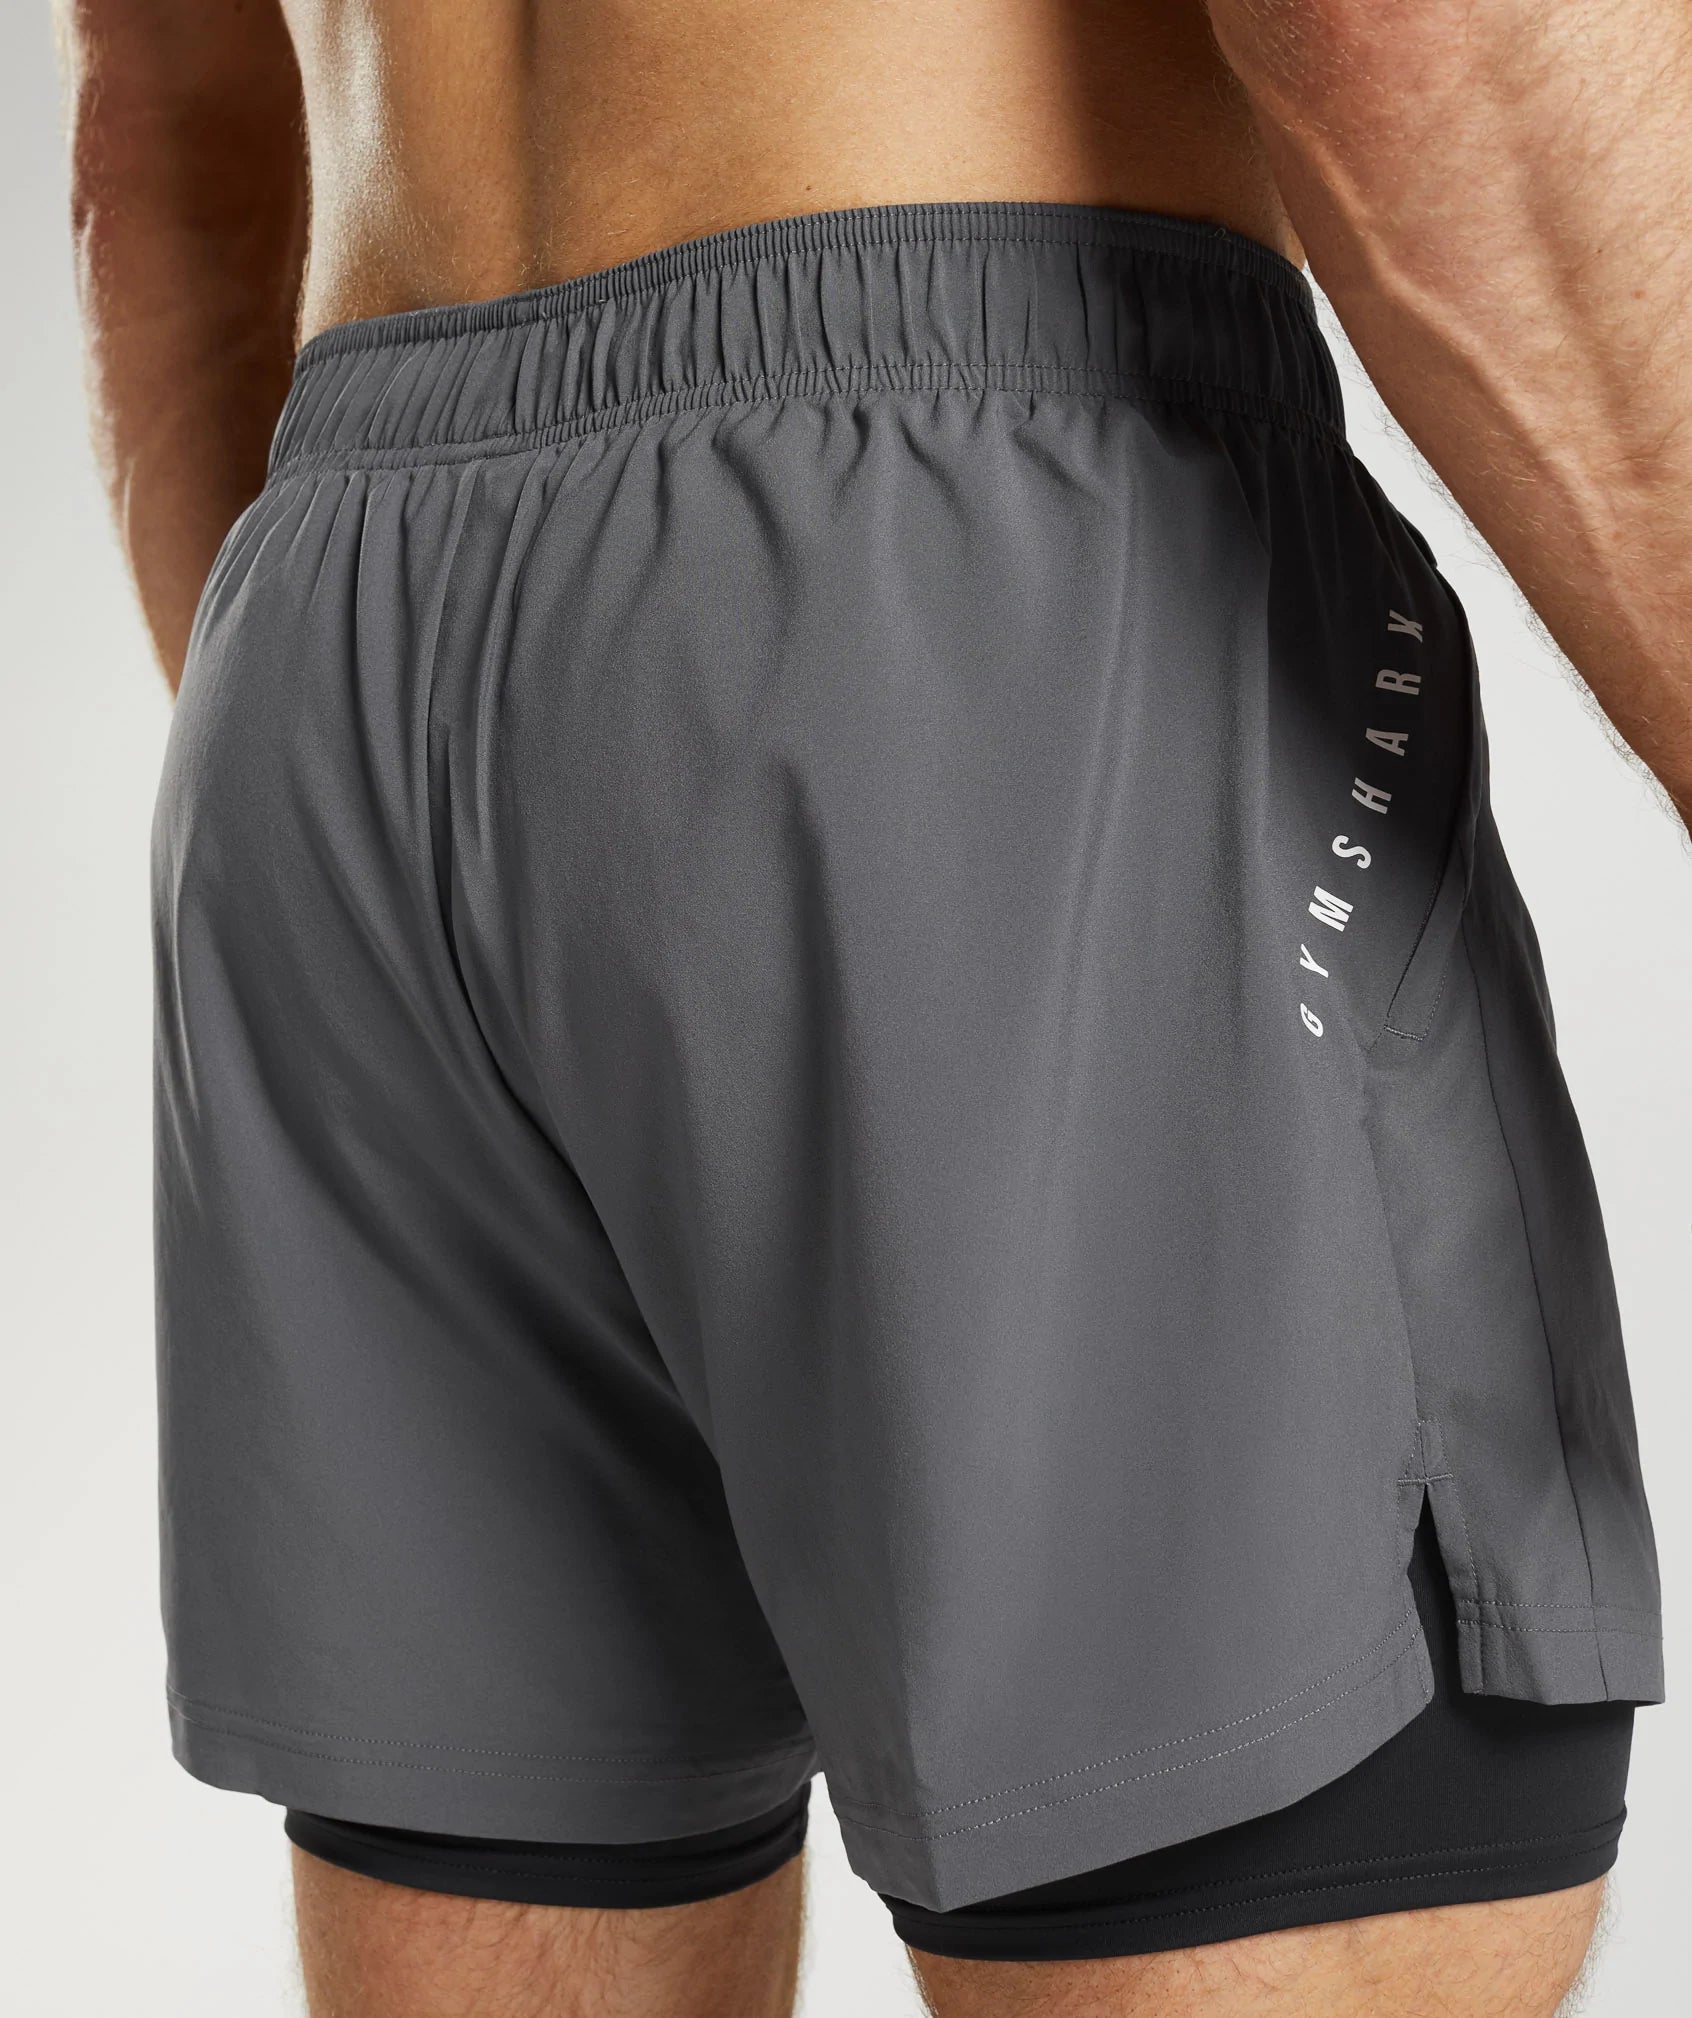 Sport 5" 2 In 1 Shorts in Silhouette Grey/Black - view 6